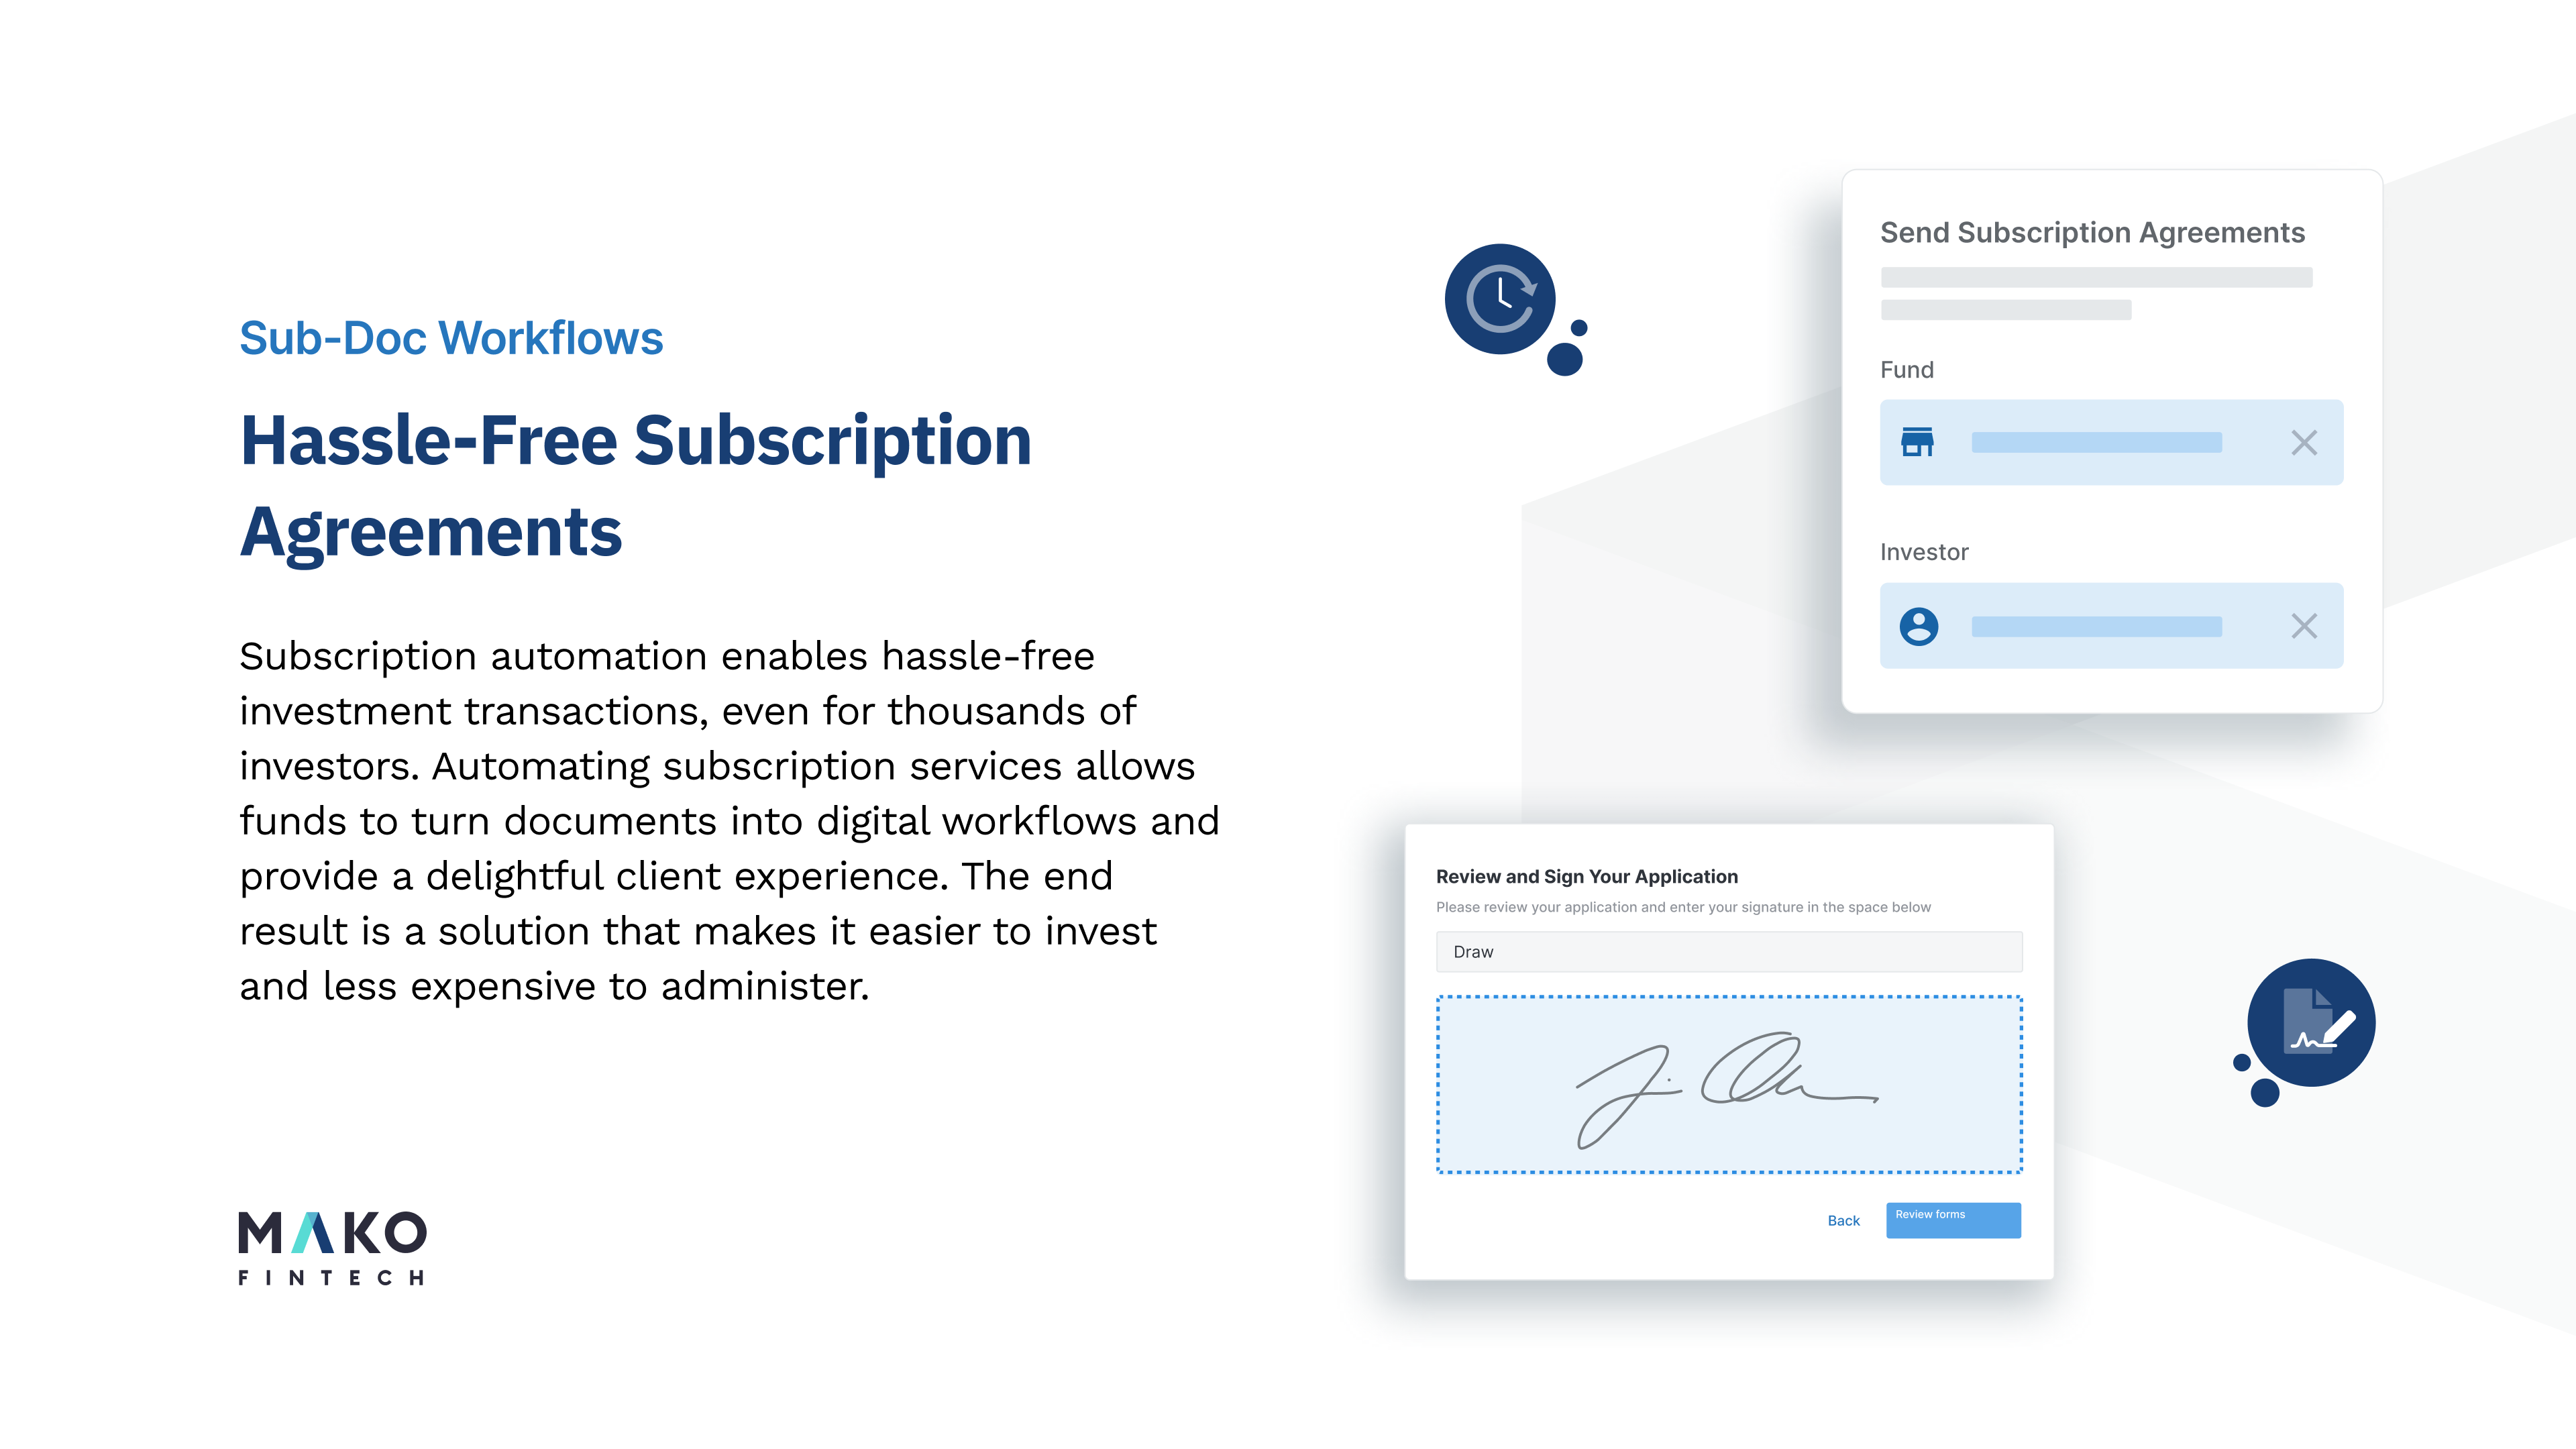 Bulk-Upload Subscription Agreements in just 15 minutes!